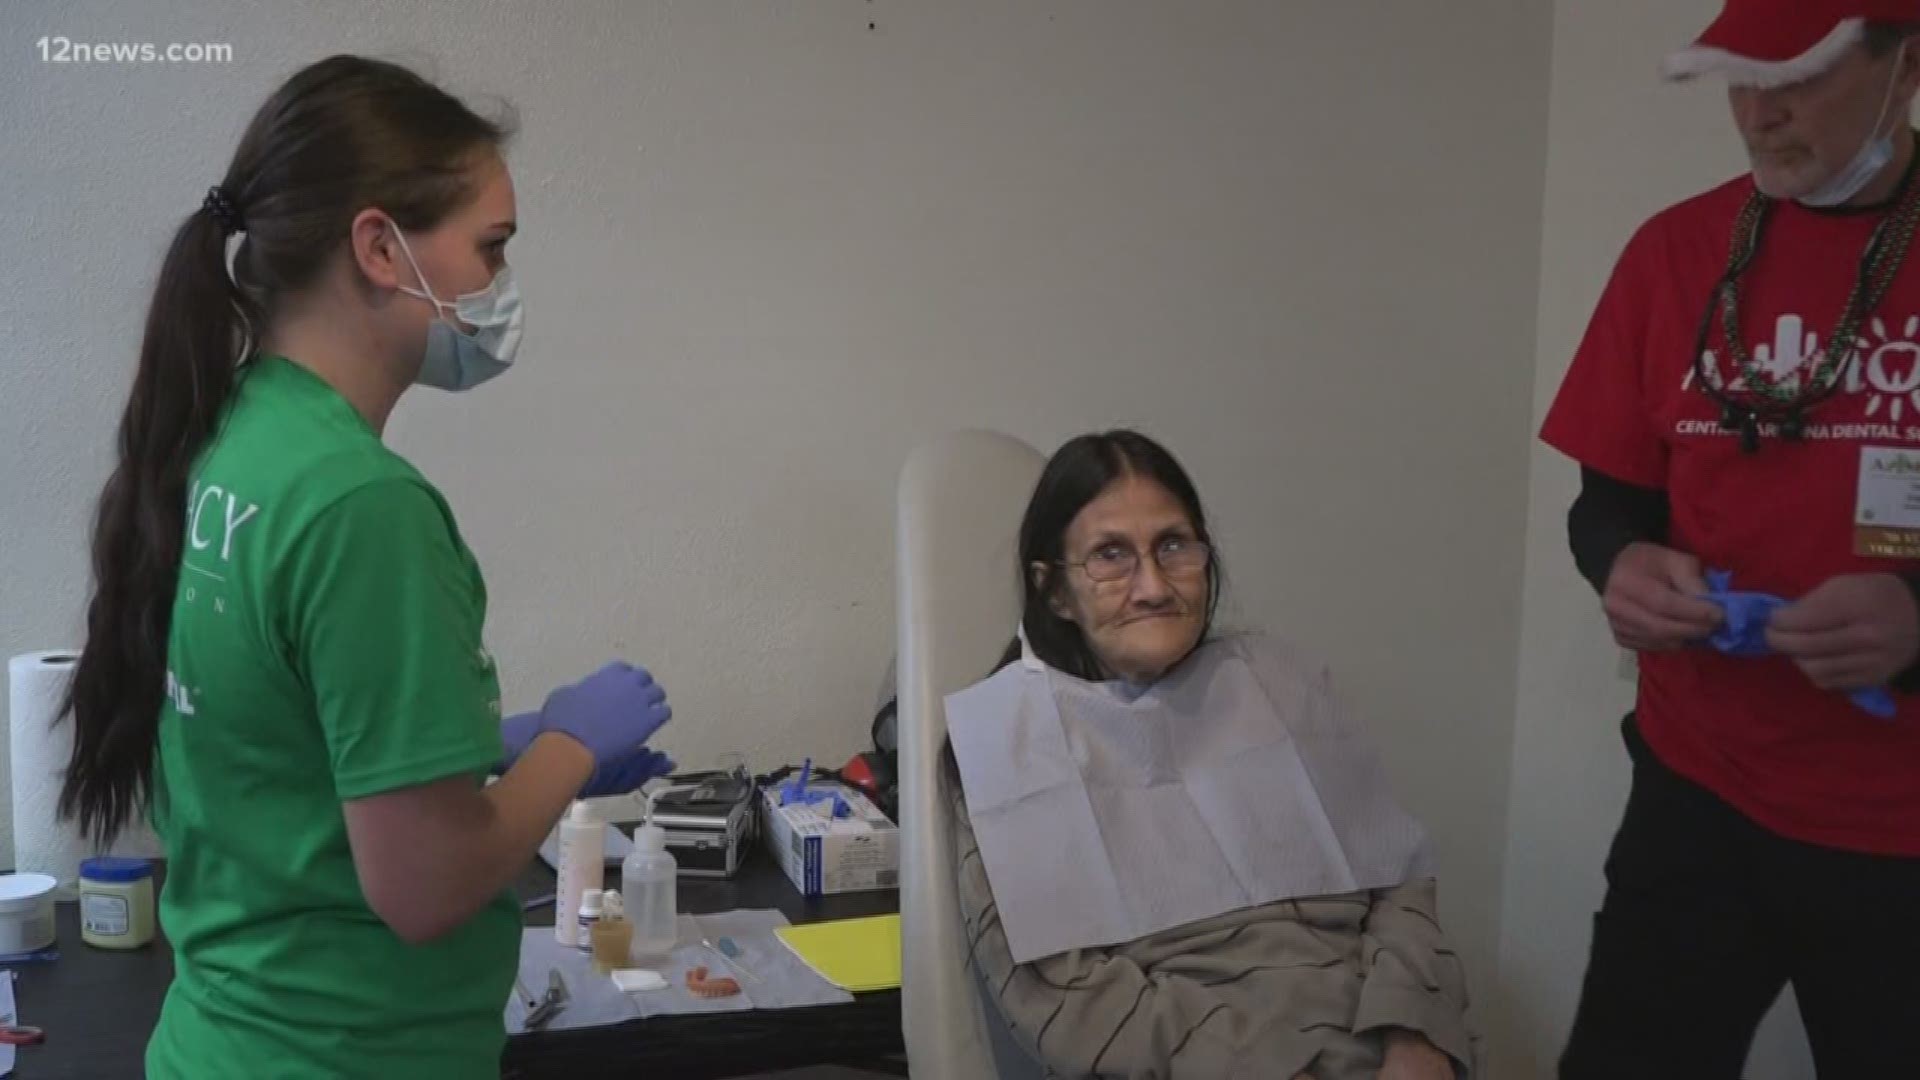 From fillings to extractions, free dental care is being provided to low income and homeless people this weekend. Care is provided on a first come, first served basis.